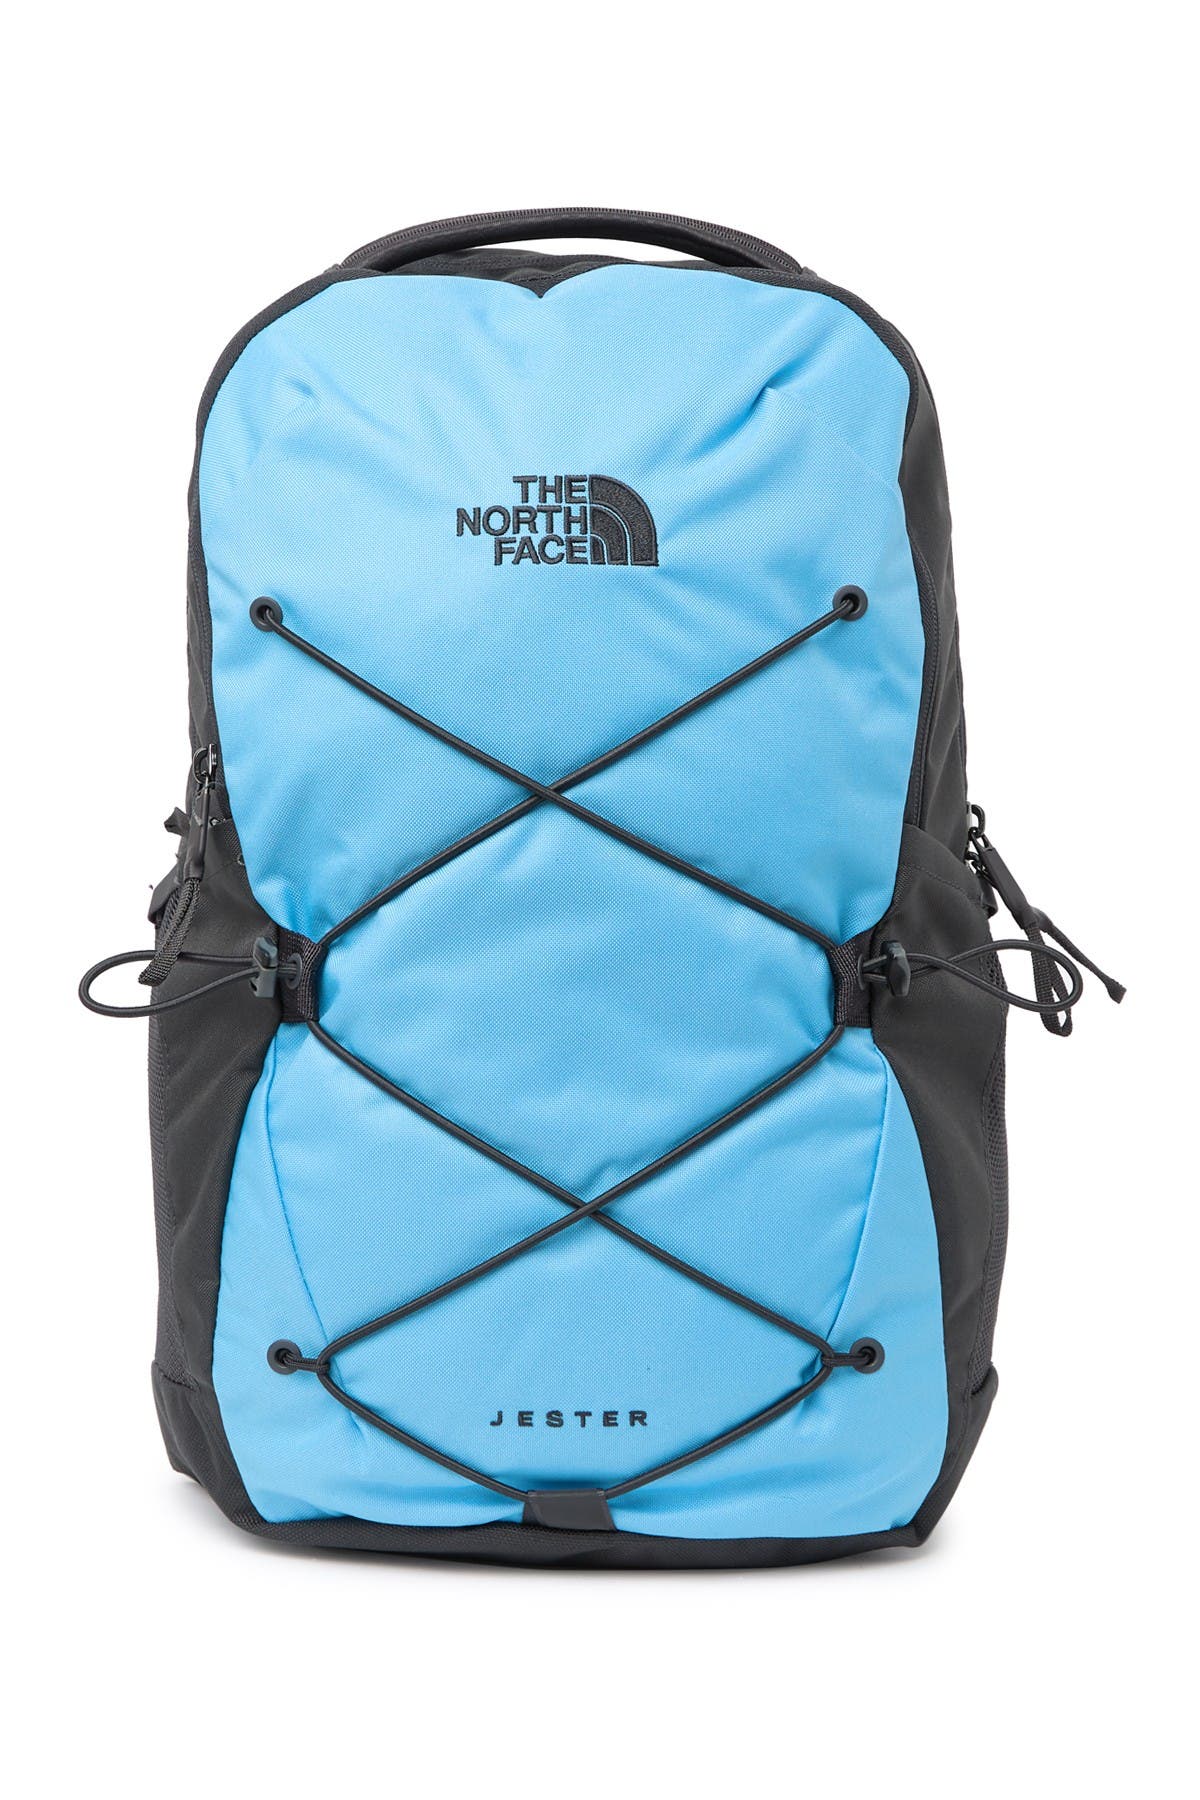 The North Face | Jester Backpack 